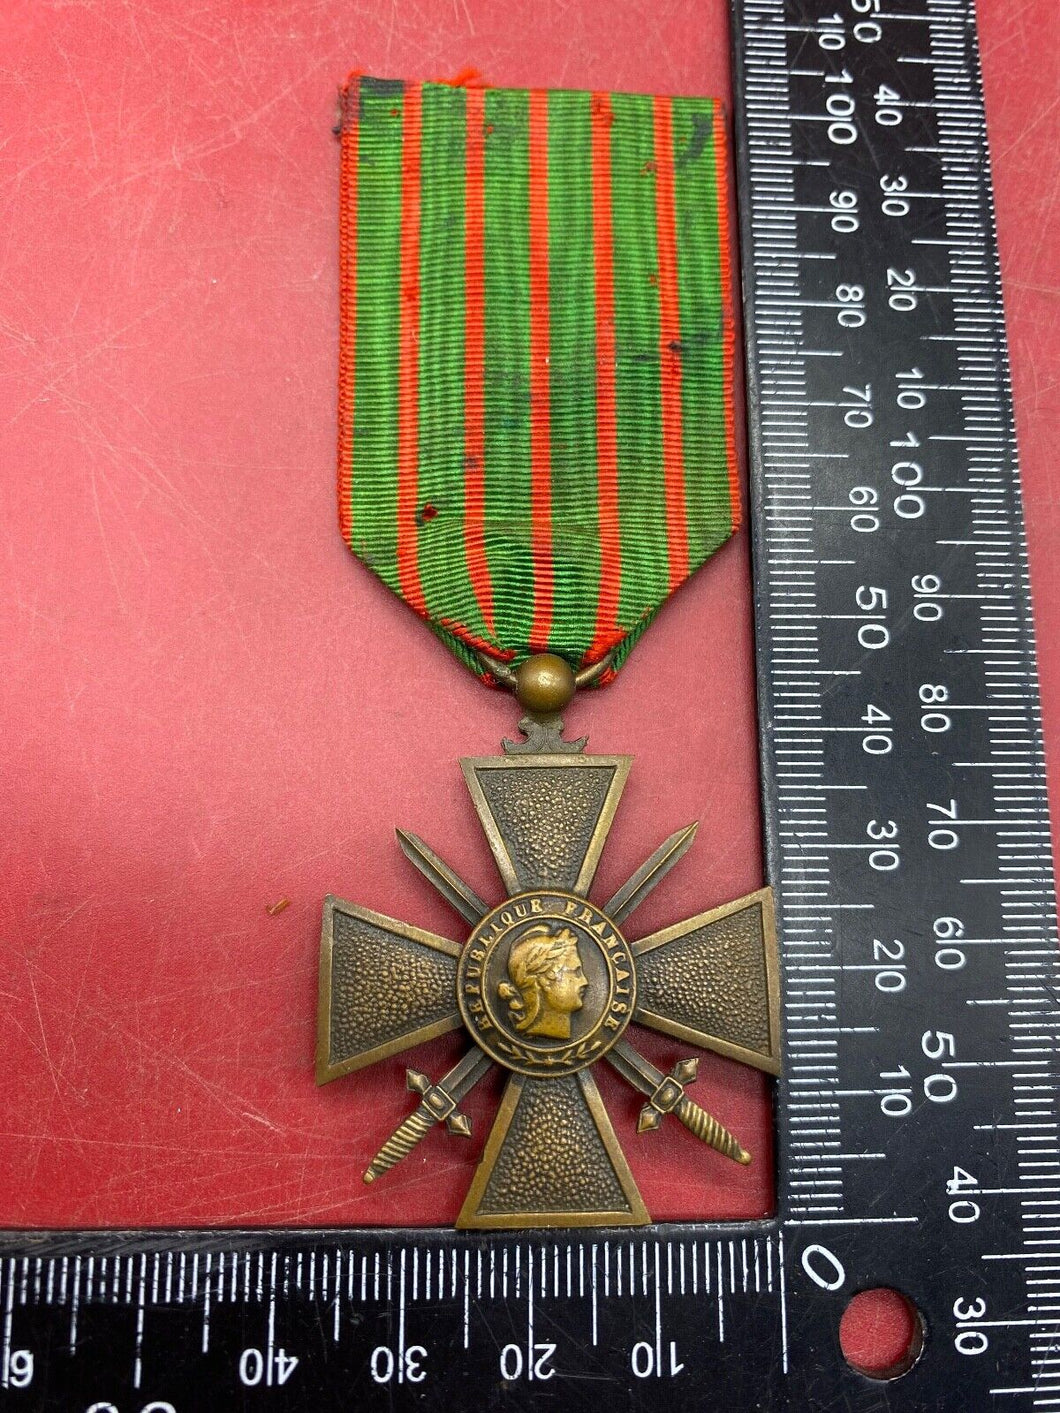 Original WW1 French Army Croix De Guerre Medal Award - 1914-1918 Dated